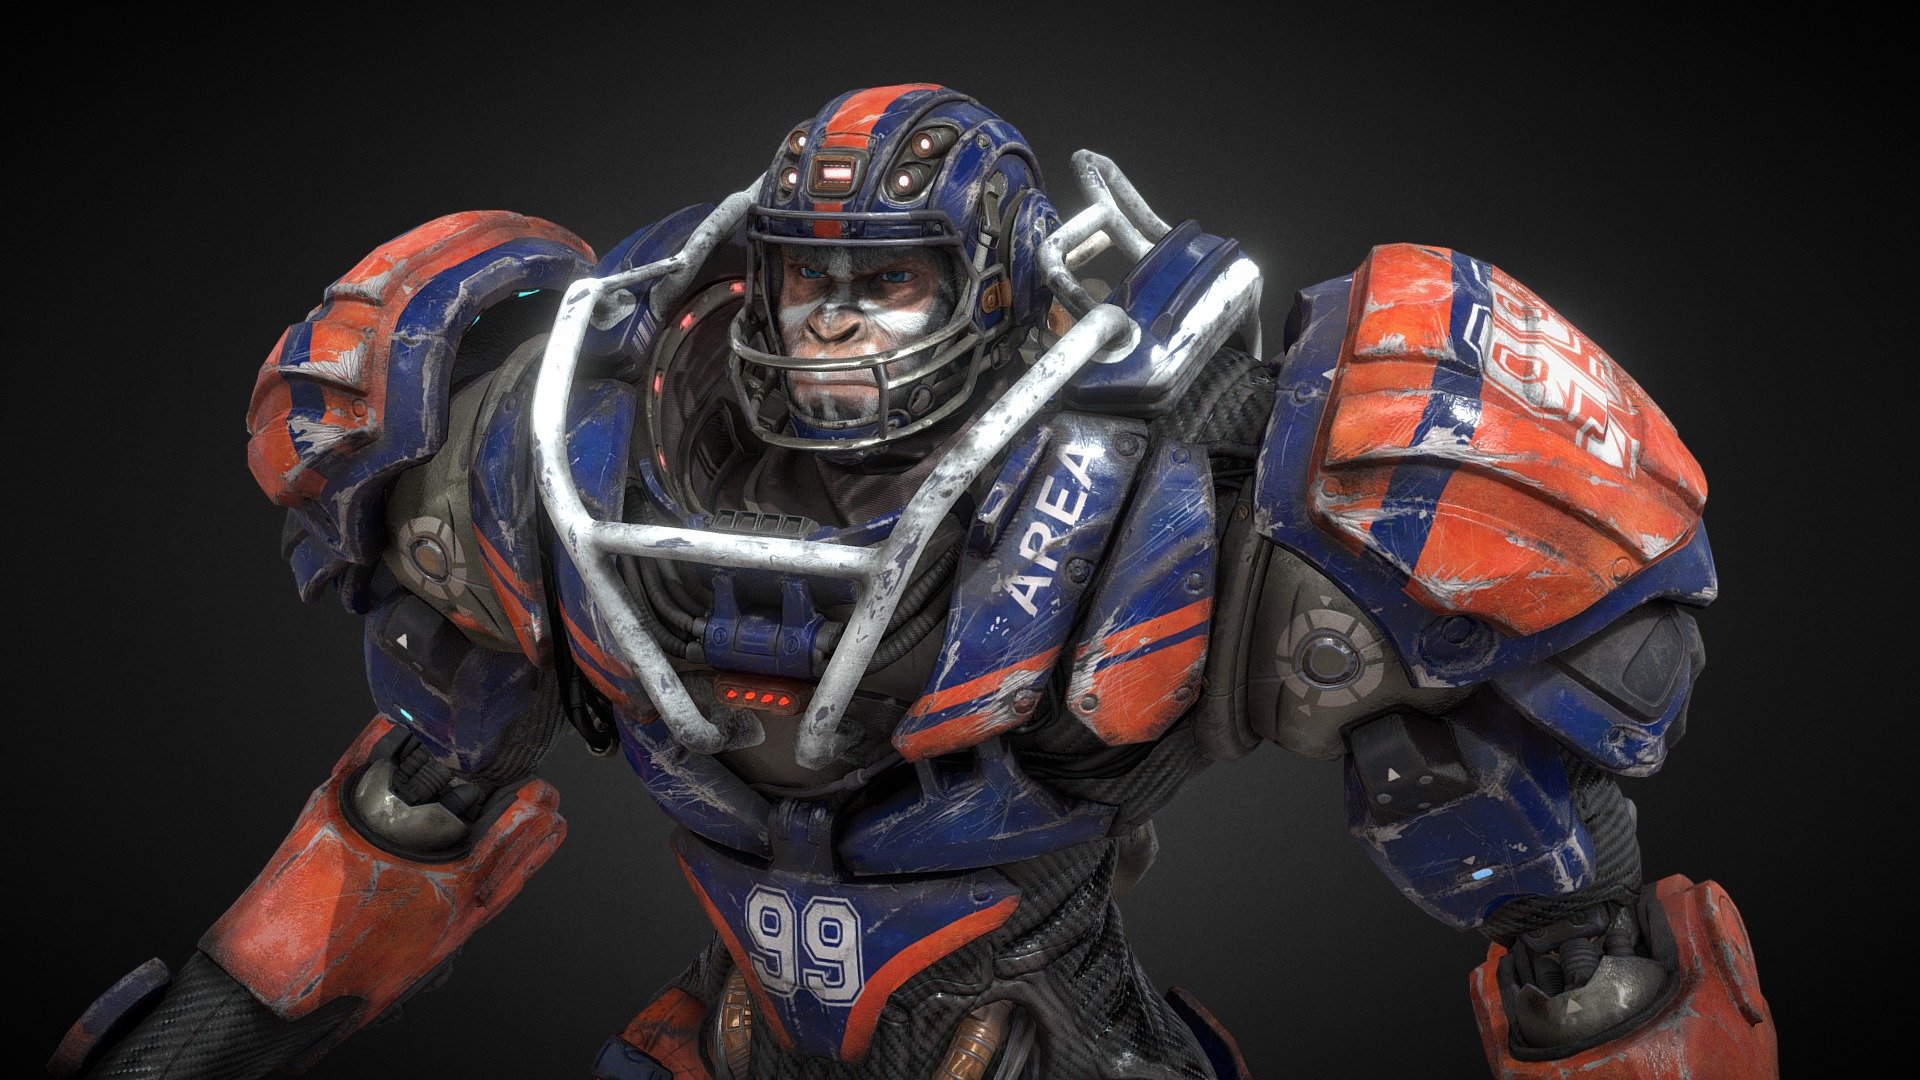 A mechanical football character inspired by colouss character from anthem game. 
I like wild animals rather than humans, so I made it with reference to the protagonist of Escape the Planet. .

The tools I used are Maya, Substance, zbrush, and Marvelous. etc

Thank you for watching. Have a nice day 3d model